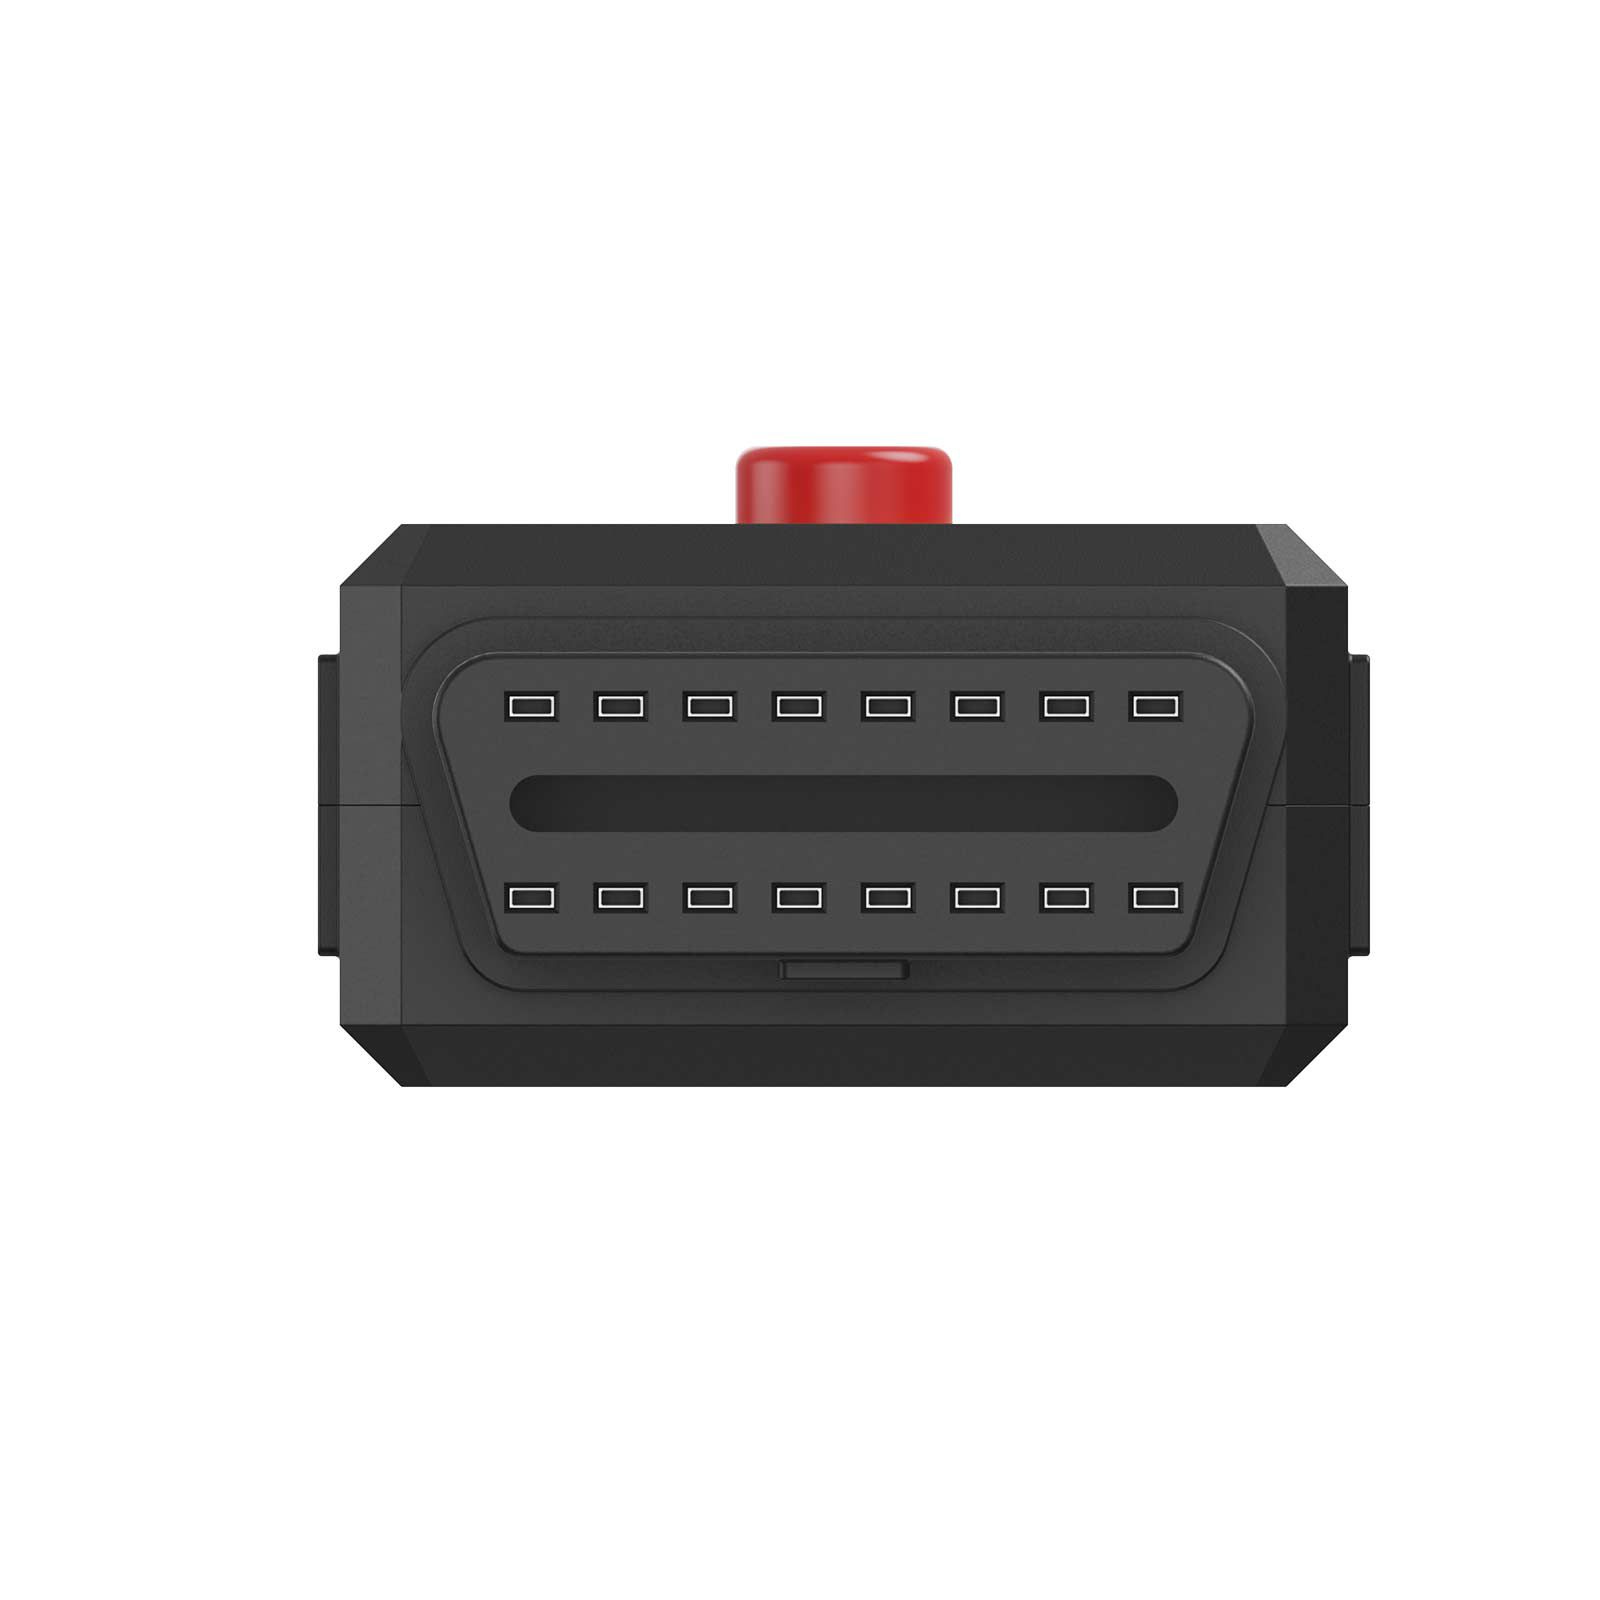 Godiag GT108 Super OBDI-OBDII Universal Conversion Adapter For Car, SUV, Truck, Tractor, Mining Vehicle, Generator, Boat, Motorcycle